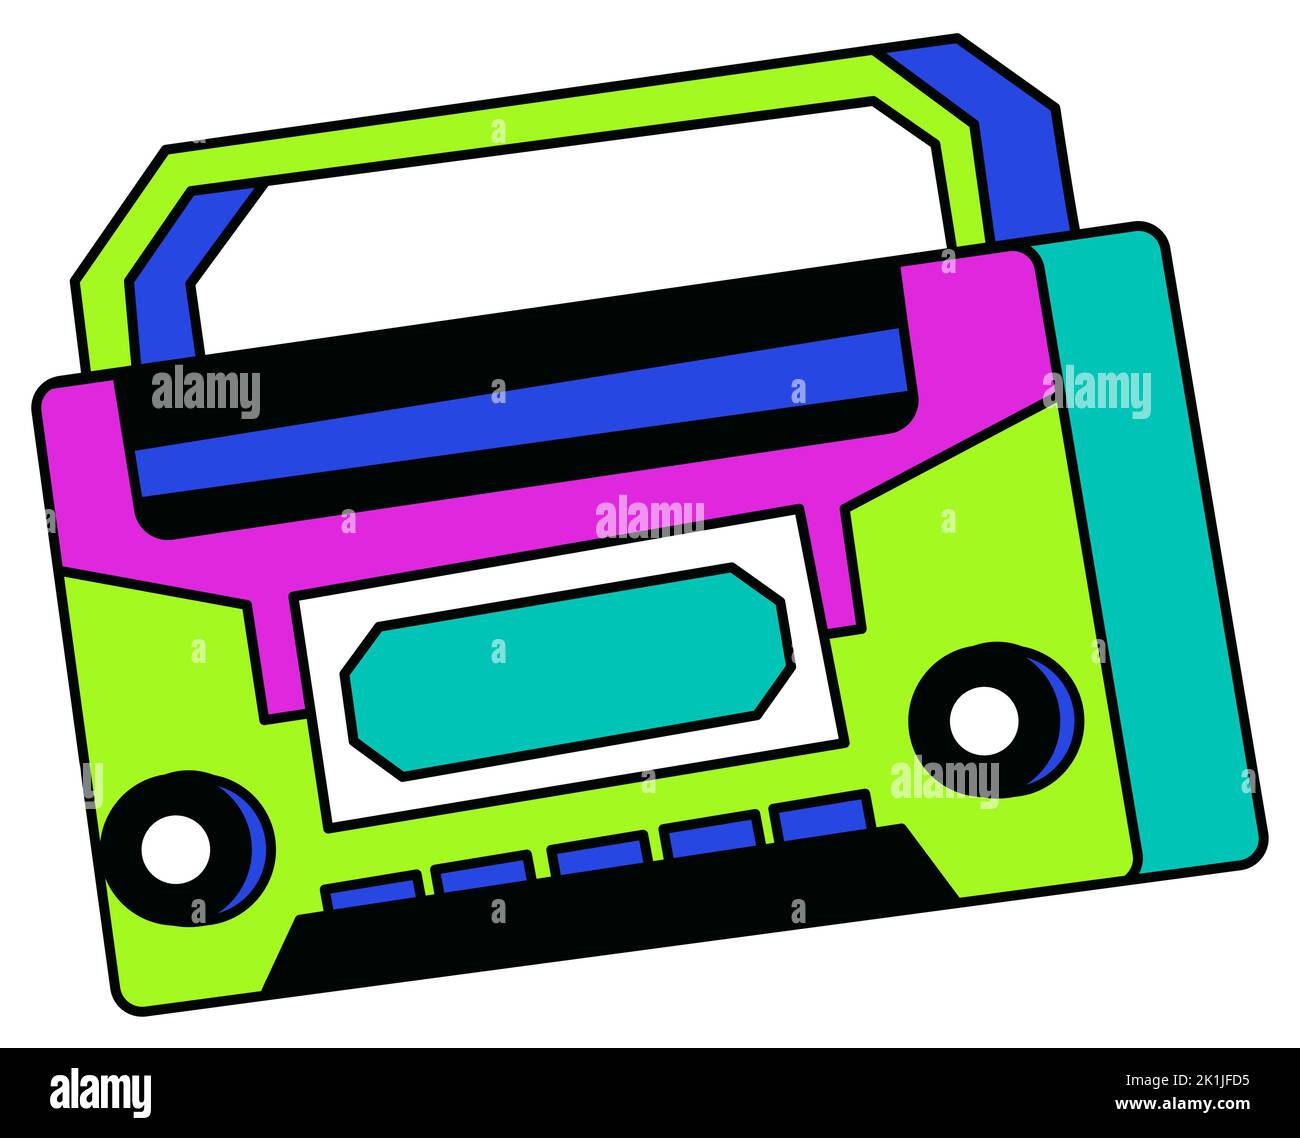 Old fashioned boombox, cassette player 90s sticker Stock Vector